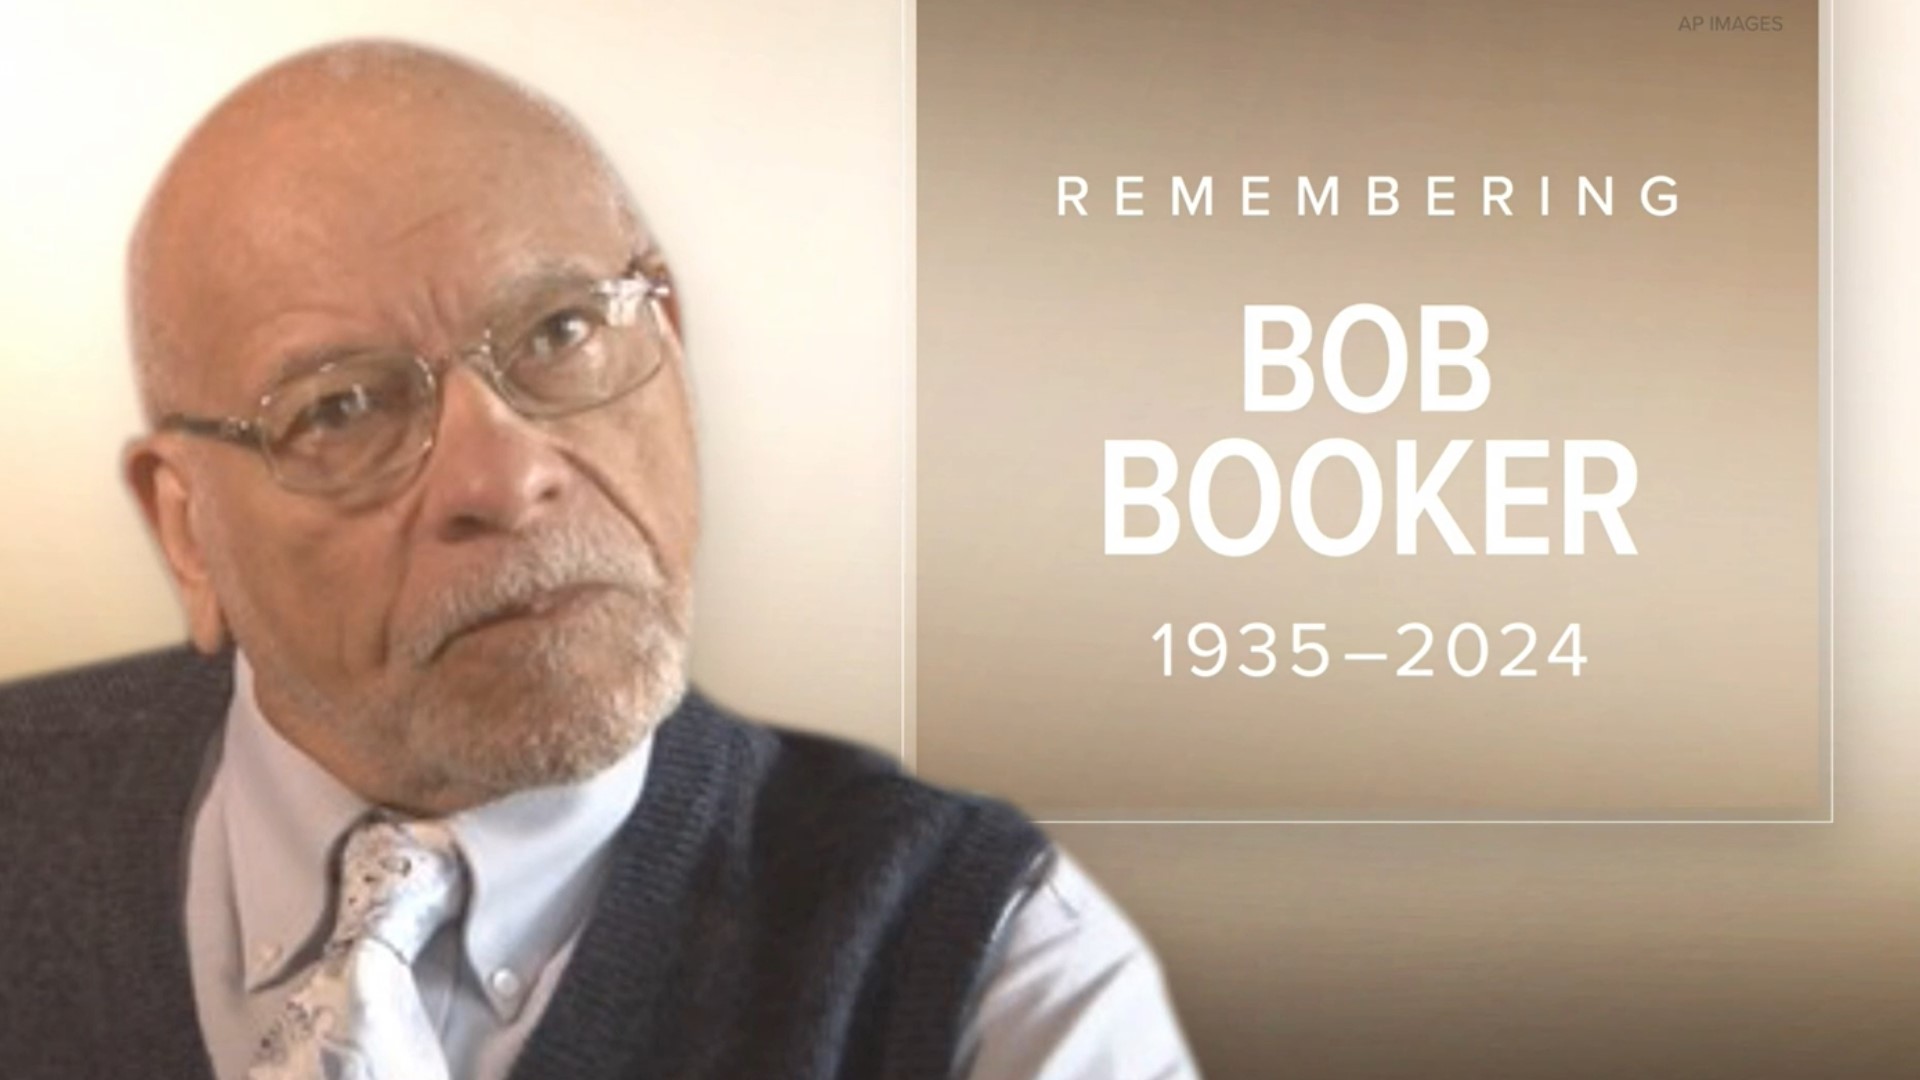 Robert "Bob" Booker was born in a segregated South in 1935. He later became Knoxville's first Black Tennessee representative.